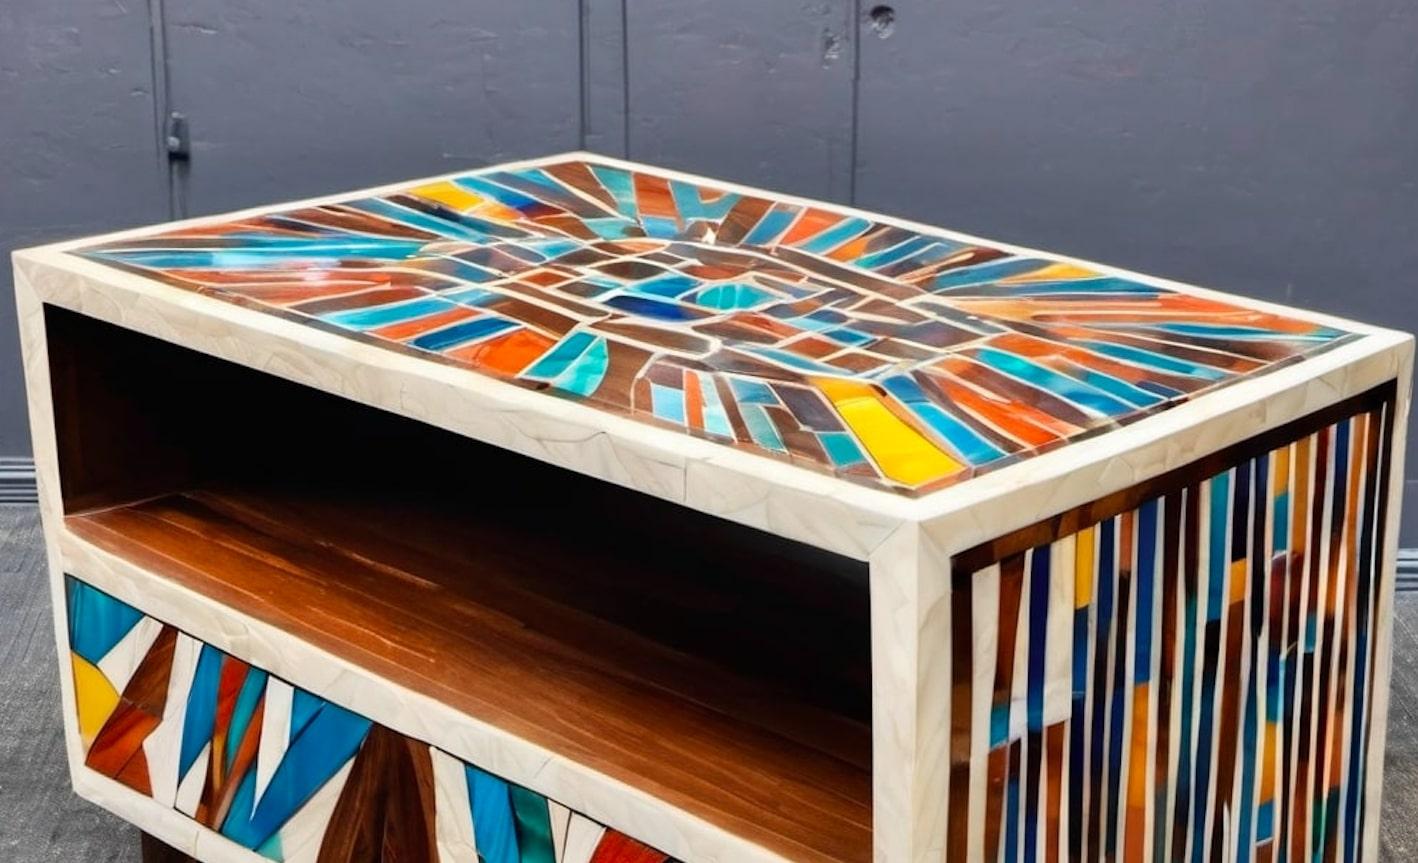 Transport yourself to the vibrant colors and festive spirit of India's iconic festival, Holi, with our exquisite bone inlay side table. This stunning piece represents the culmination of ancient craftsmanship and cutting-edge technology, making it a